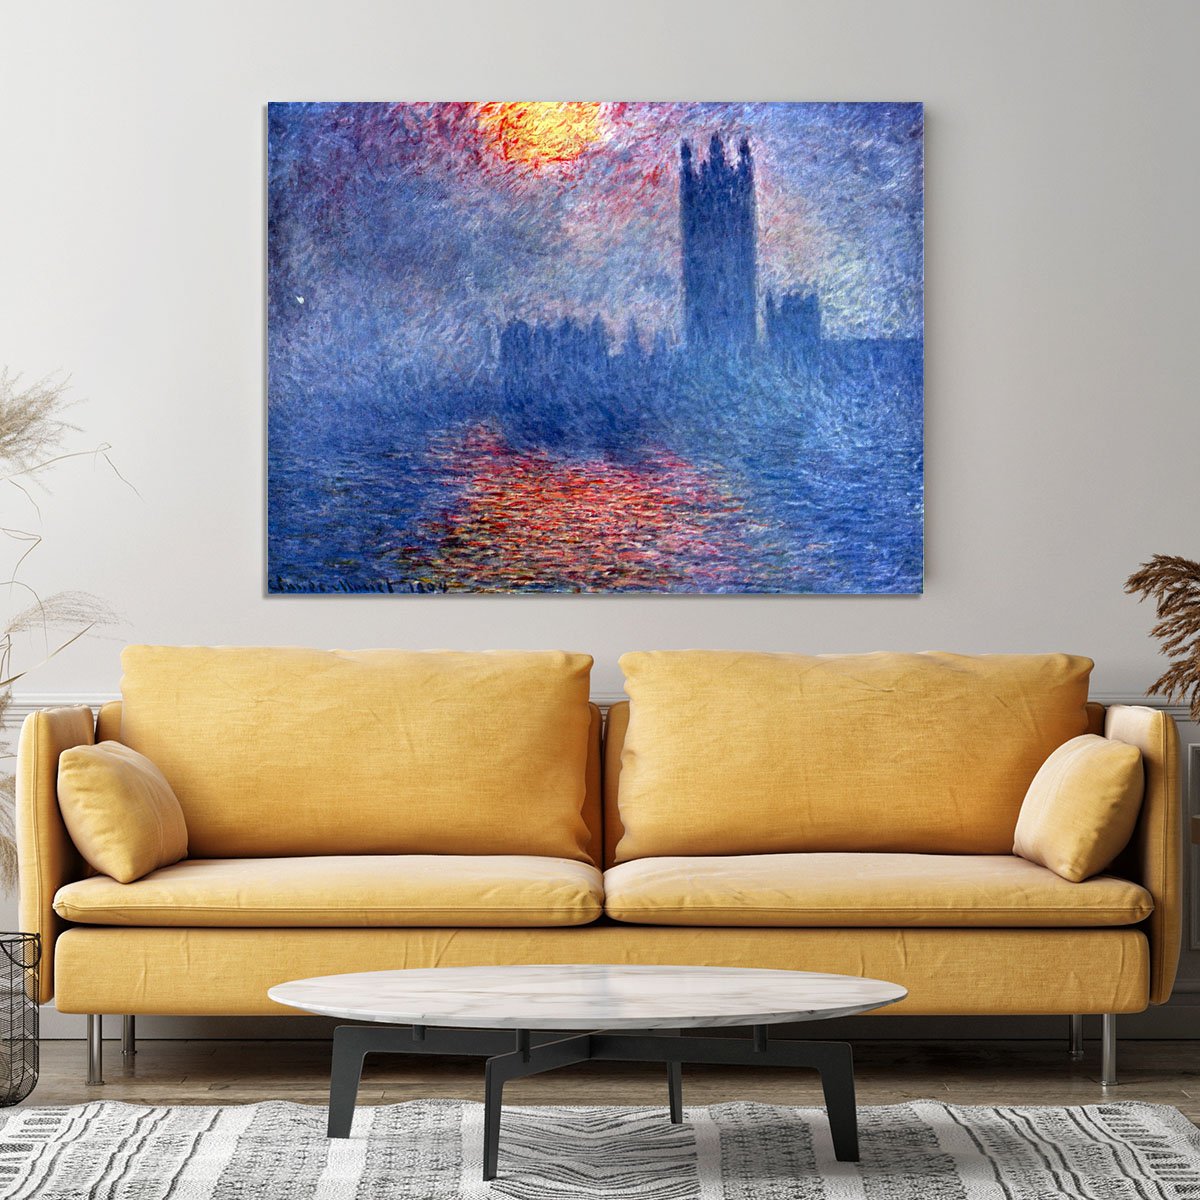 The Parlaiment in London by Monet Canvas Print or Poster